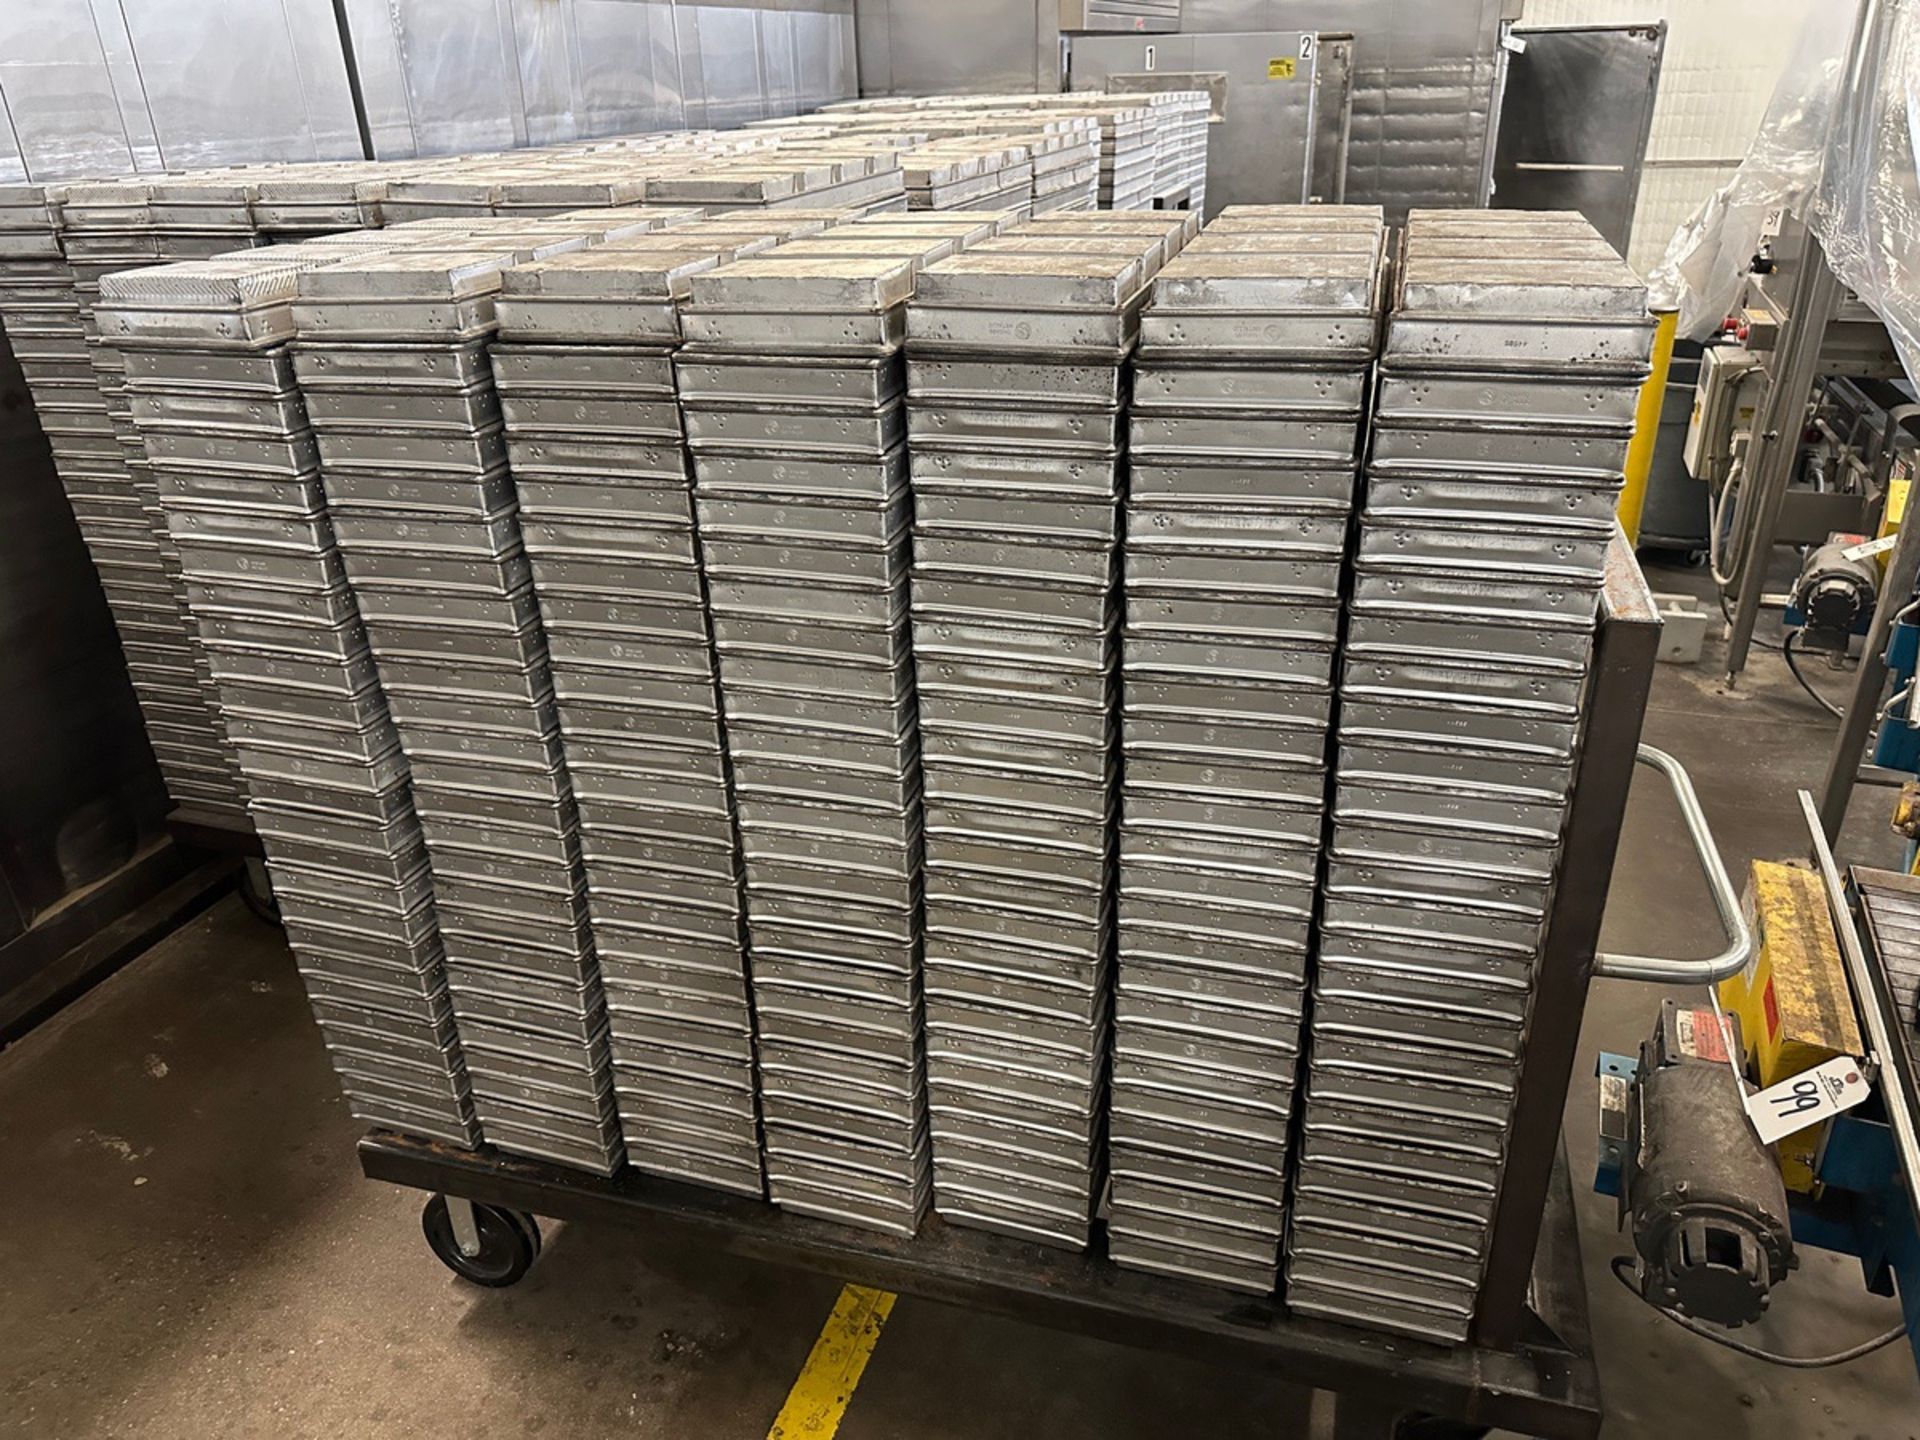 Approx. (182) 4-Loaf Bread Baking Pans on Heavy Duty Pan Cart (Approx. 9" x 25.5") | Rig Fee $50